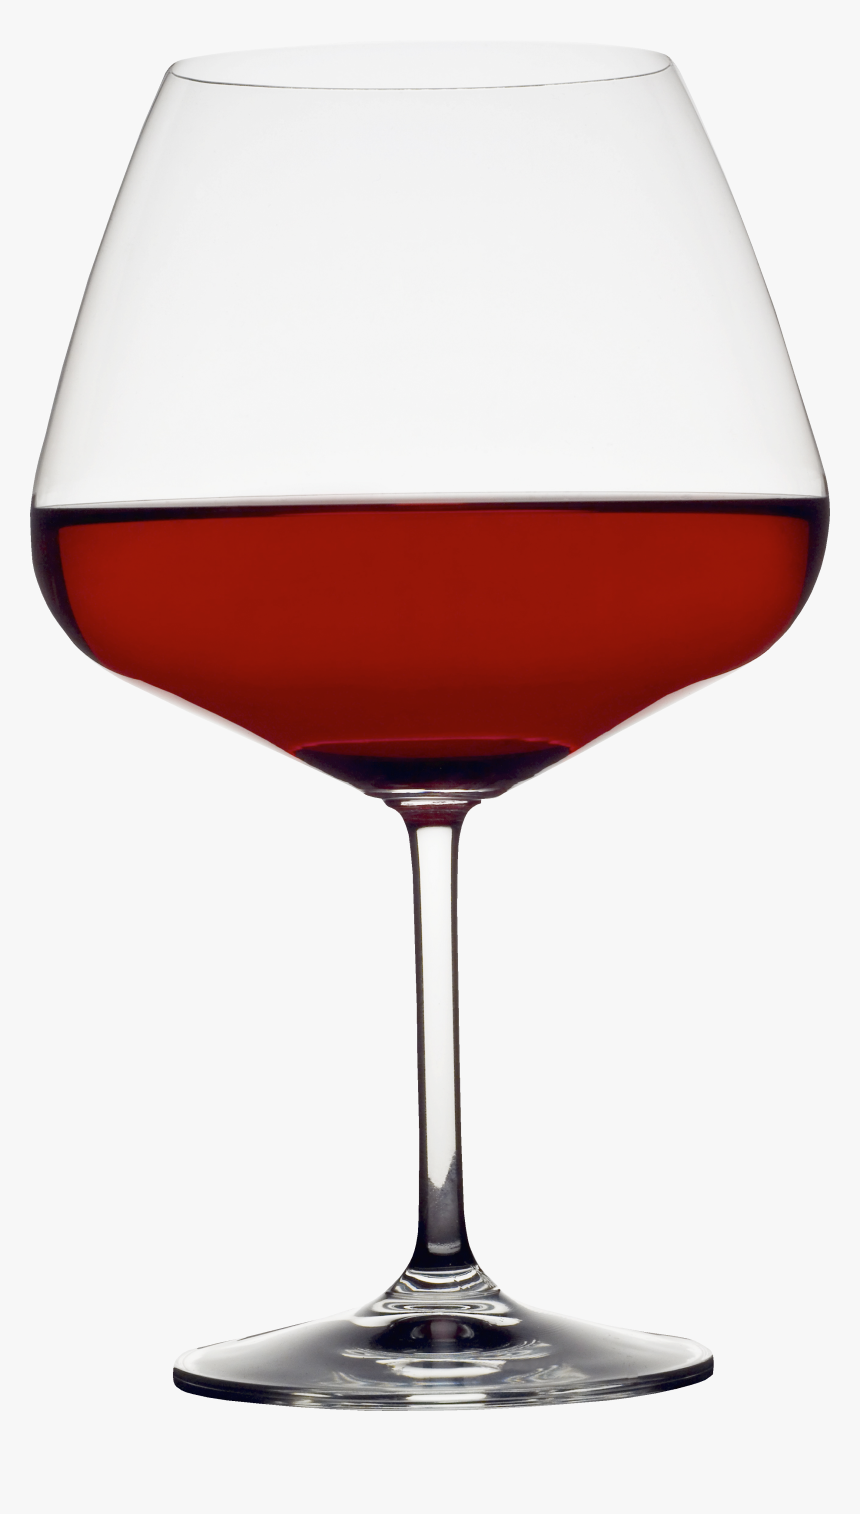 Glass Png Image - Стакан Коньяка Пнг, Transparent Png, Free Download